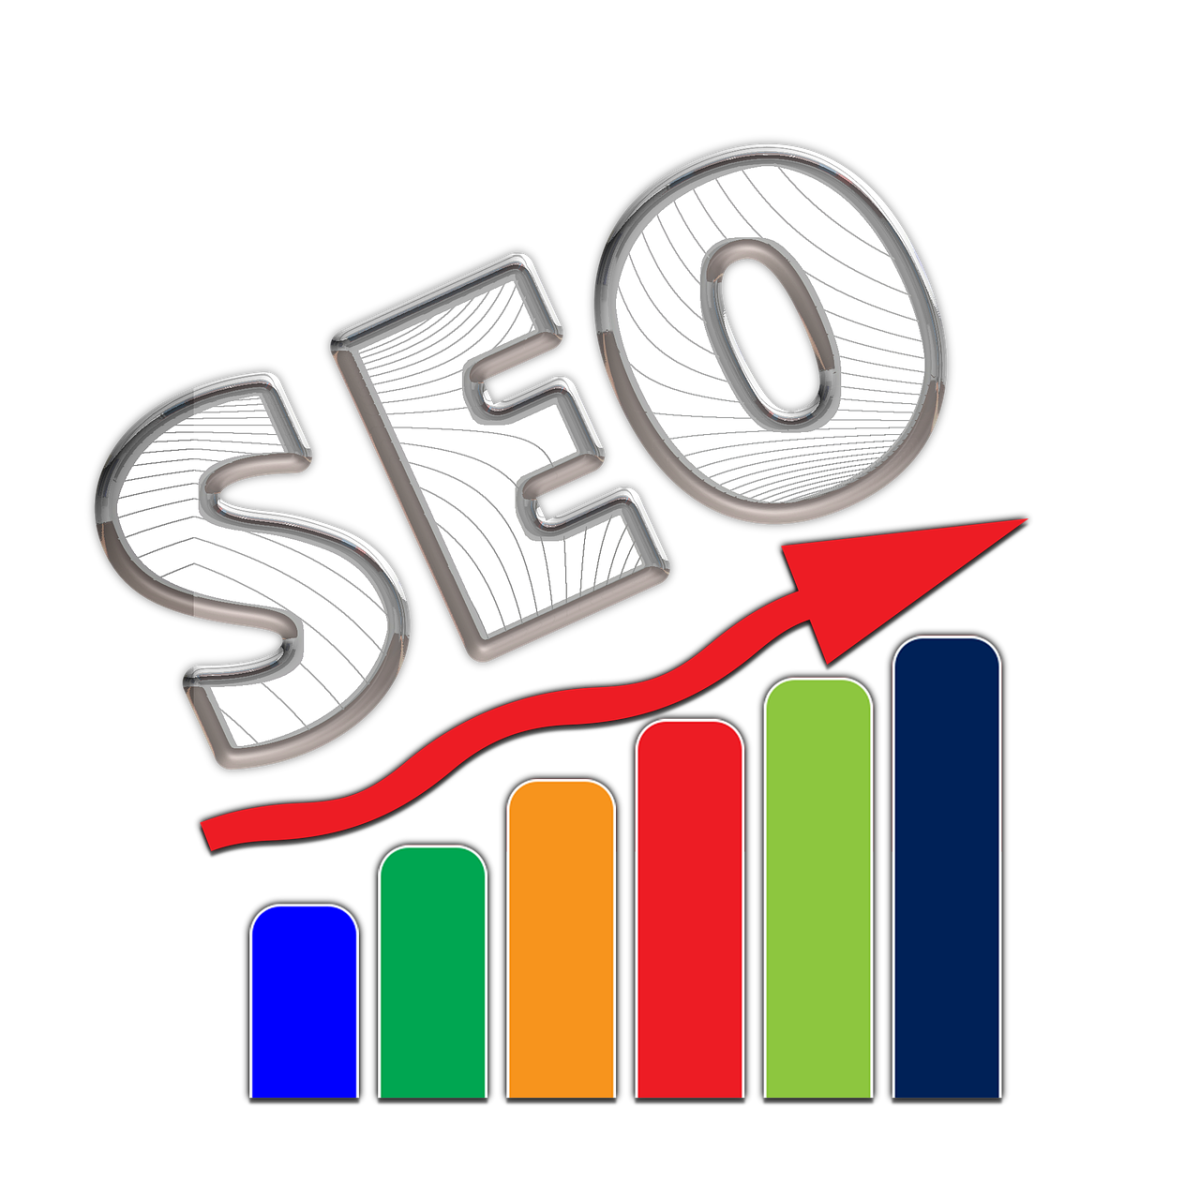 what-is-seo-and-what-effect-does-it-have-on-search-engines